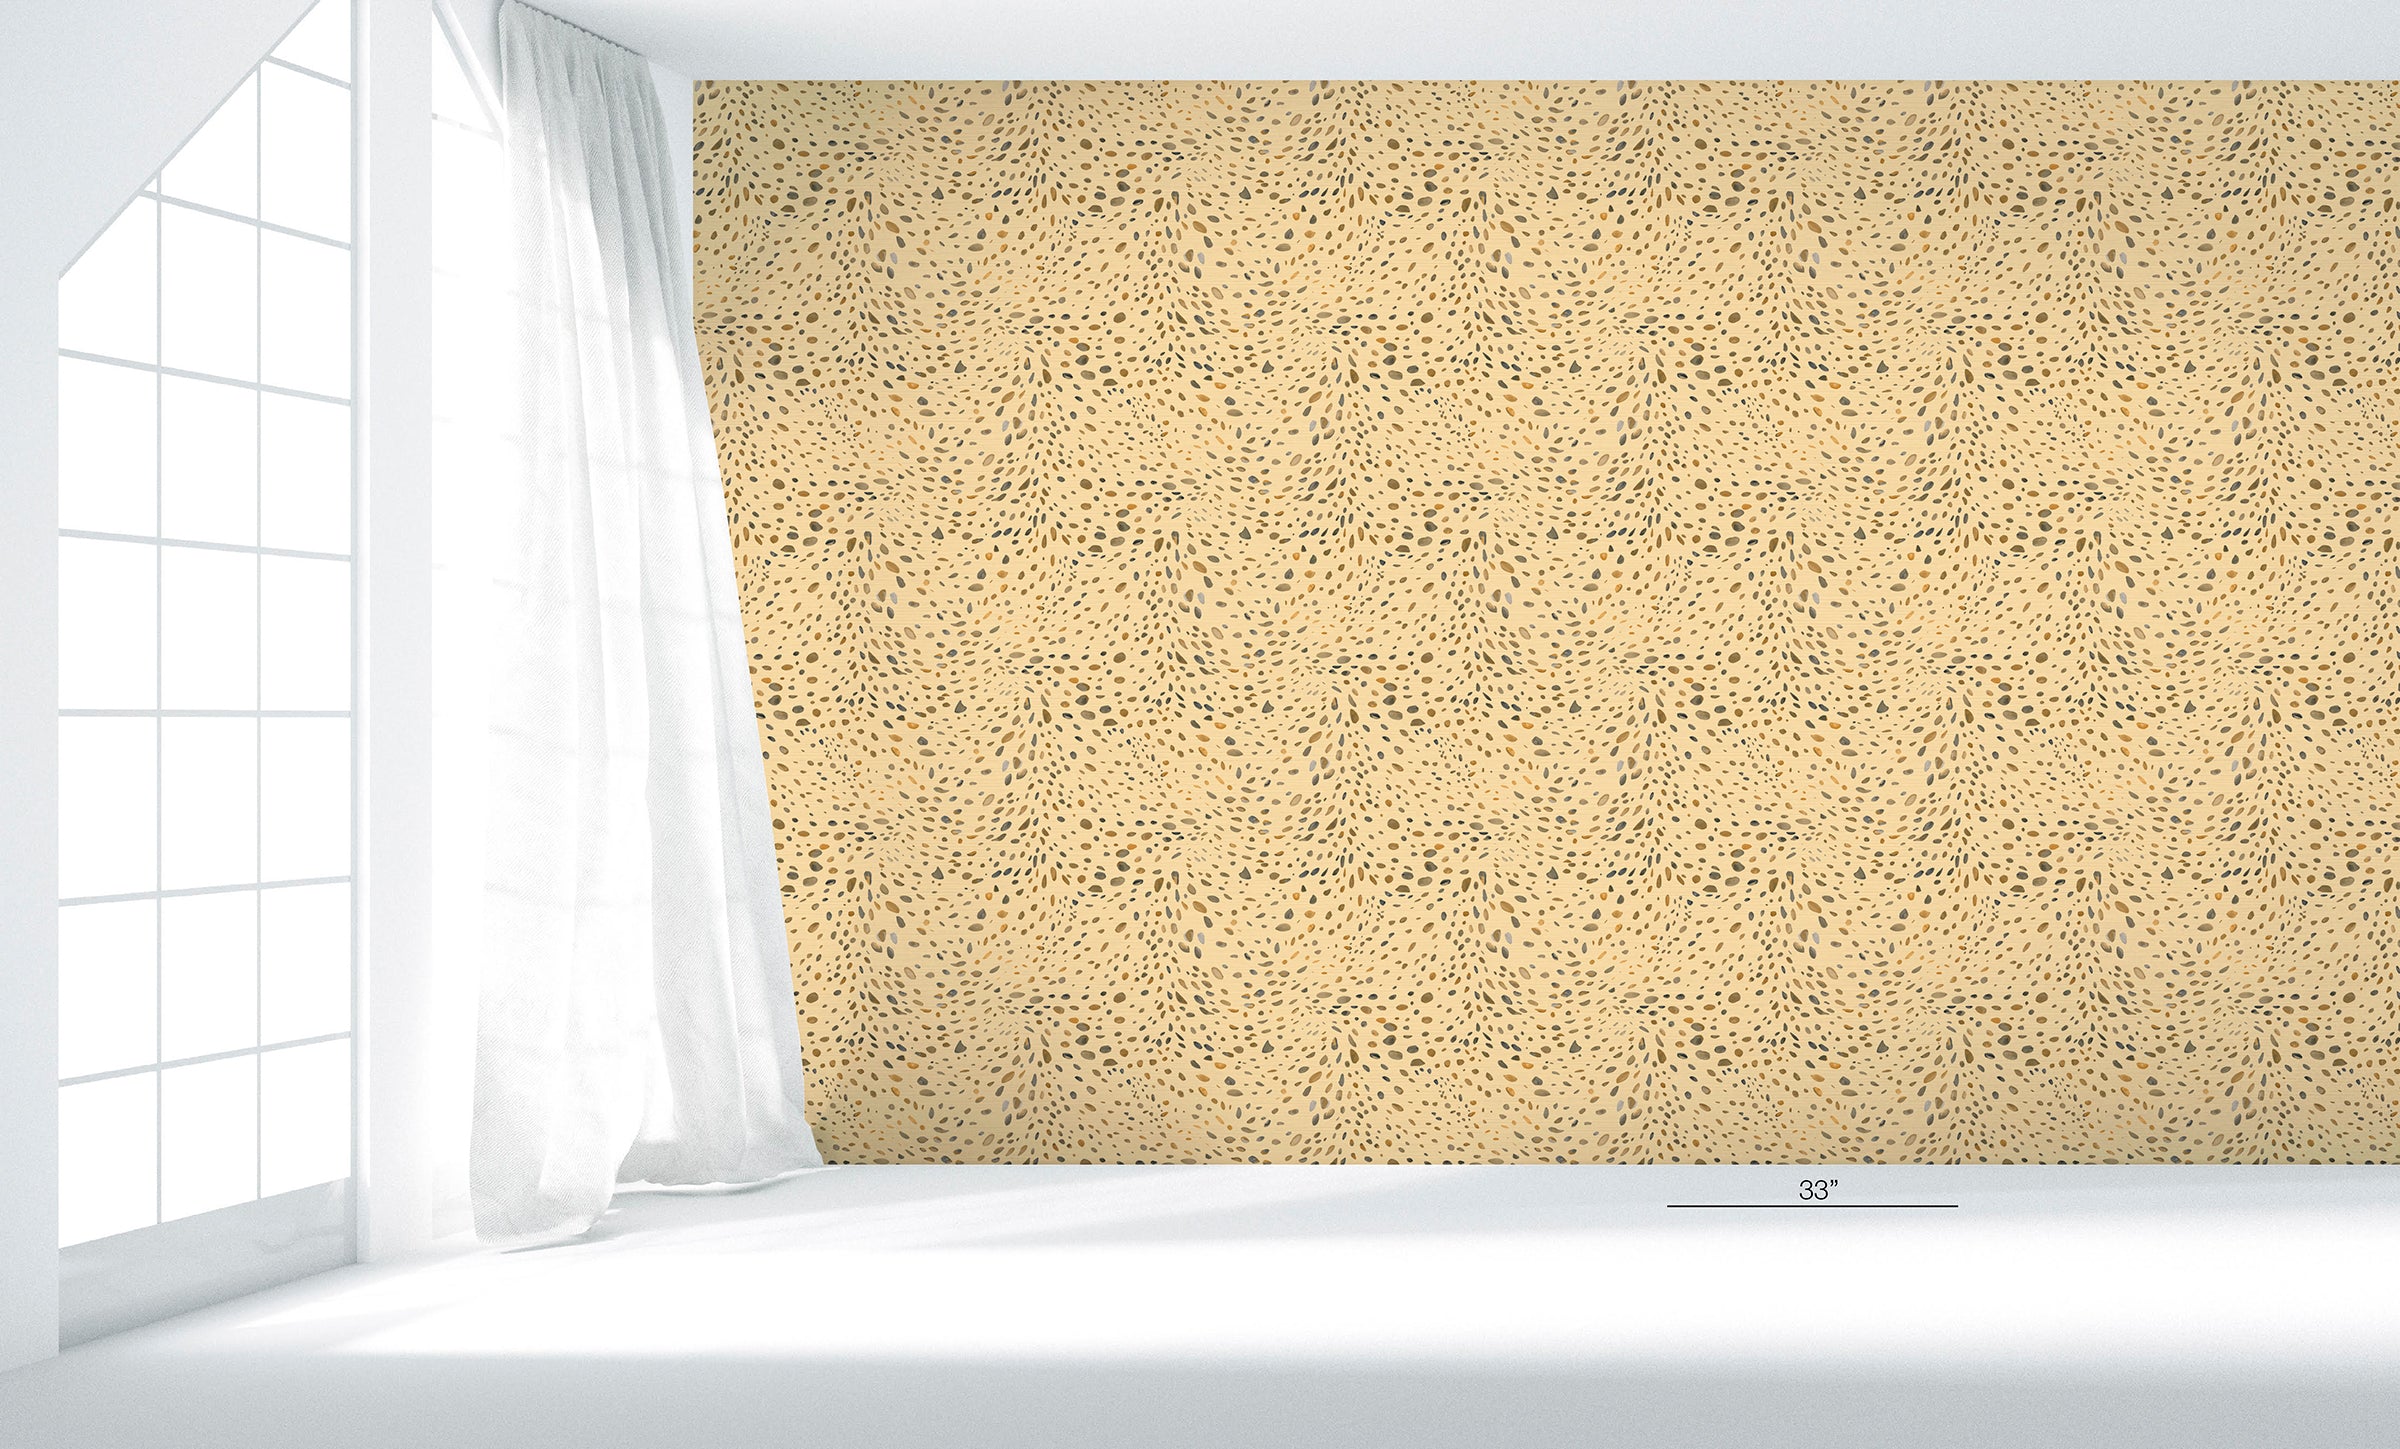 York Wallcoverings Modern Shapes Raffia Paper Strippable Roll Wallpaper  Covers 6075 sq ft MS6505  The Home Depot